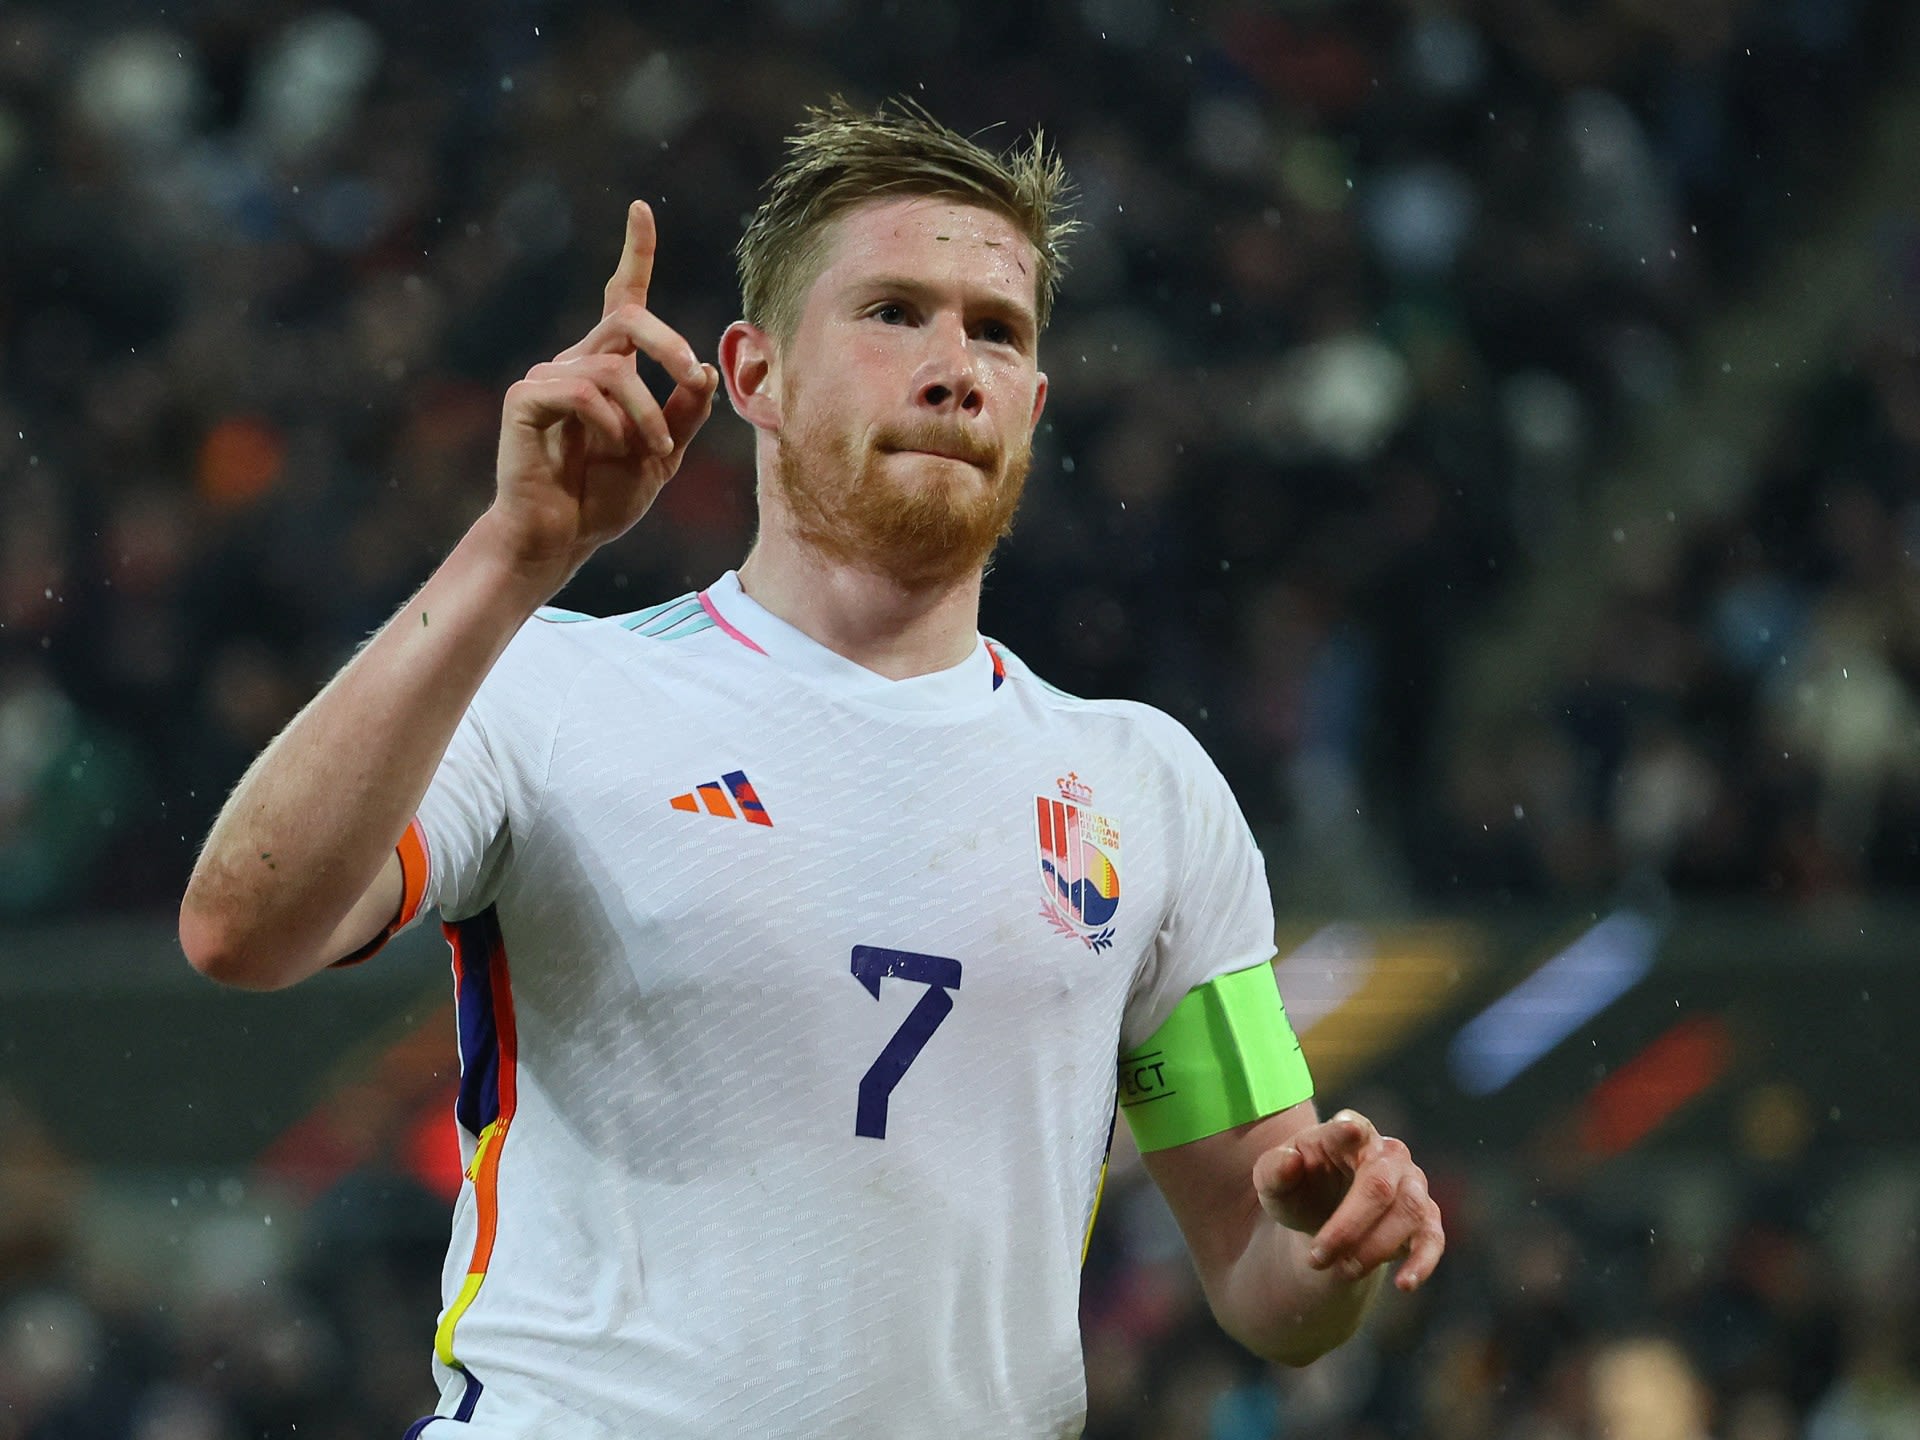 Euro 2024: De Bruyne upbeat about Belgium’s chances in Germany